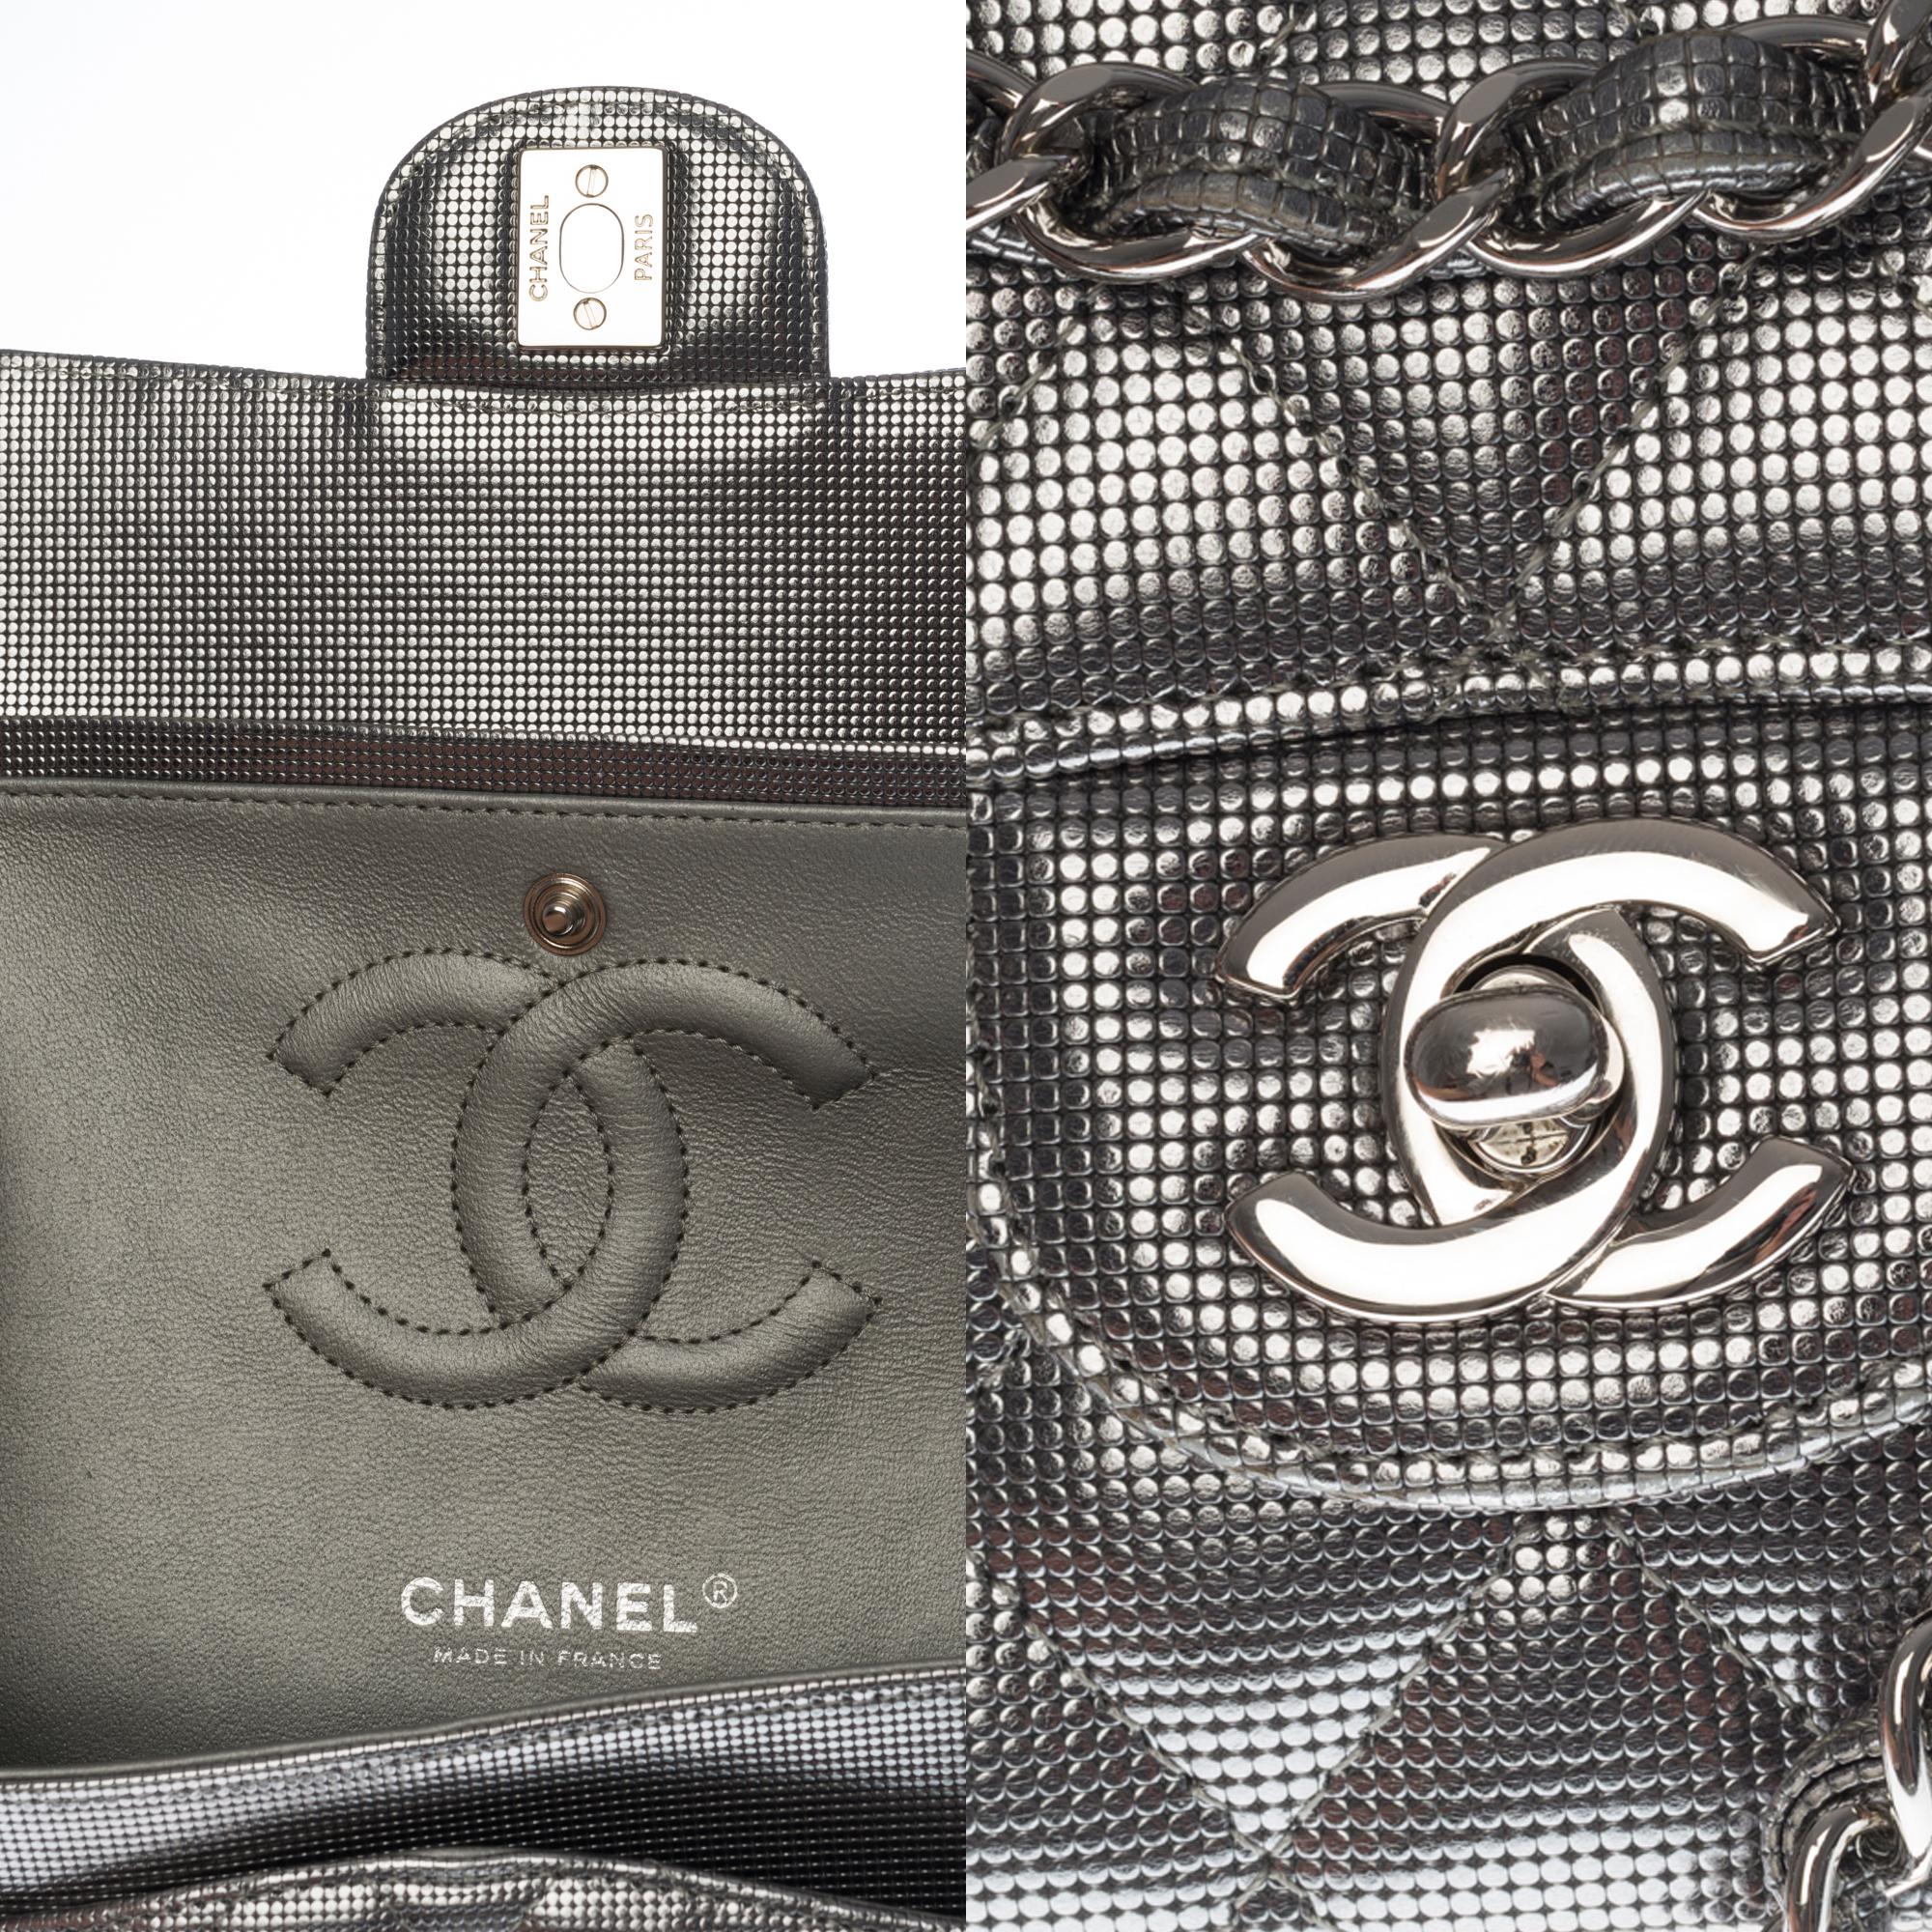 Chanel Timeless double flap Shoulder bag in Silver Metal quilted leather, SHW 1